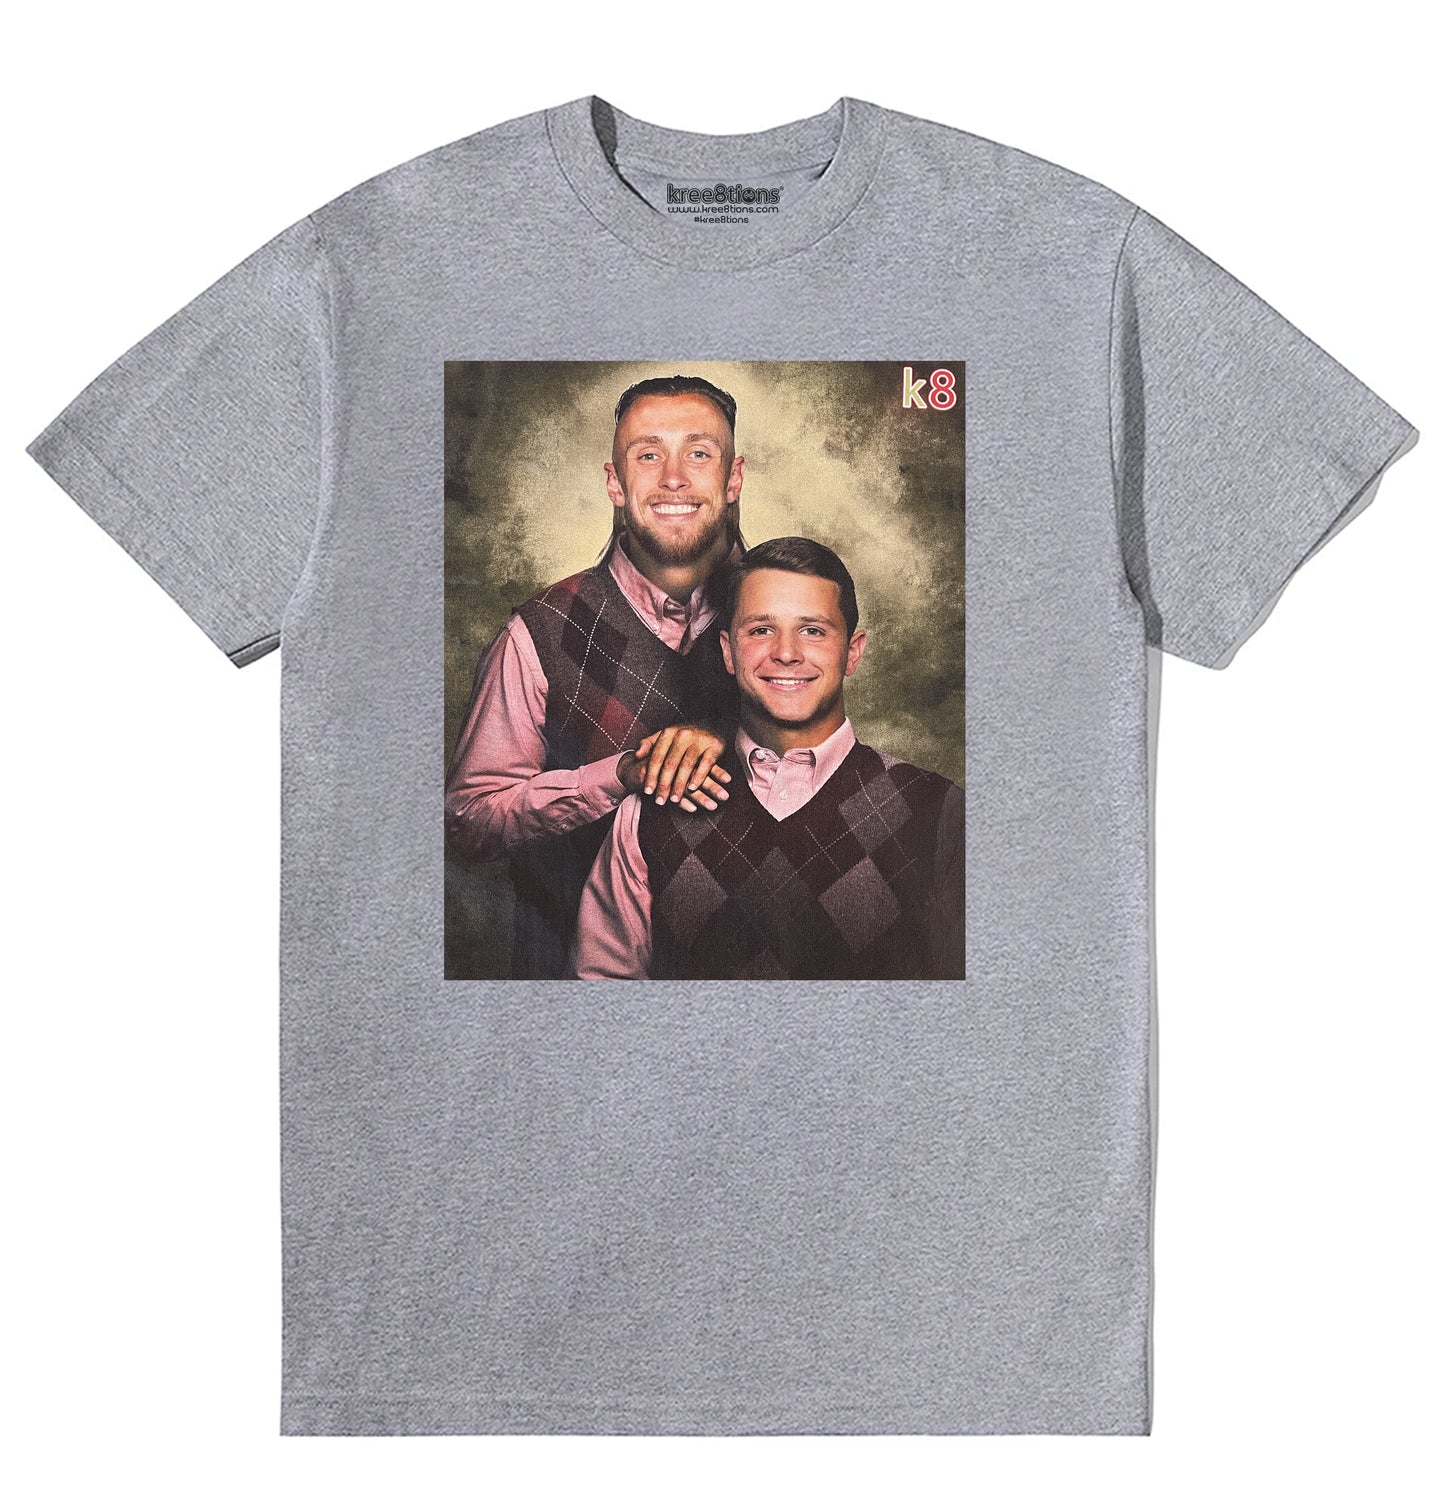 K8 - Step Brothers George Kittle and Brock Purdy